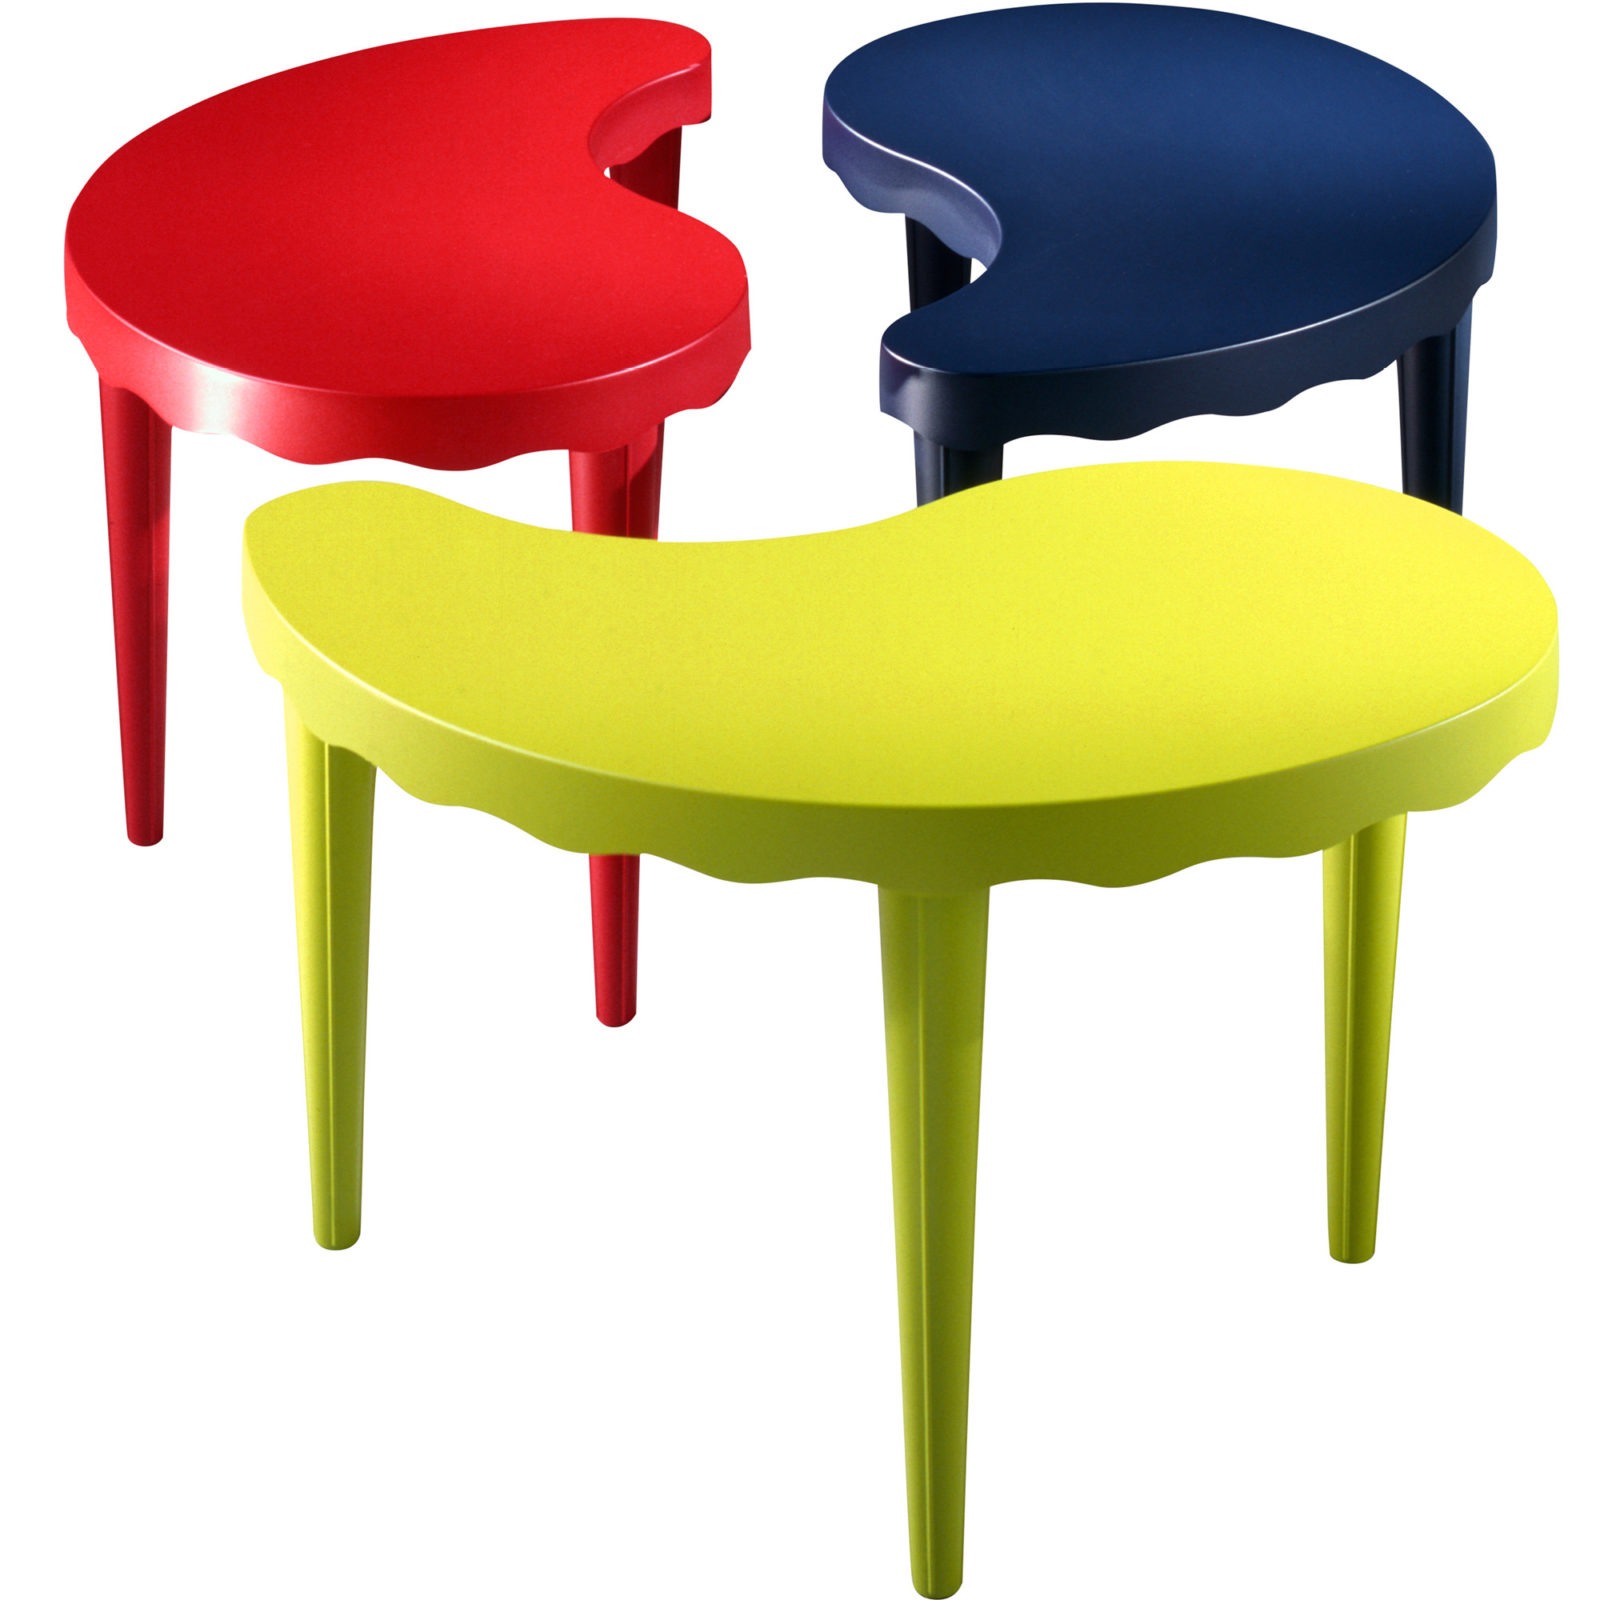 Three kidney-shaped NJURUNDA coffee tables, one red, one black and one bright green.